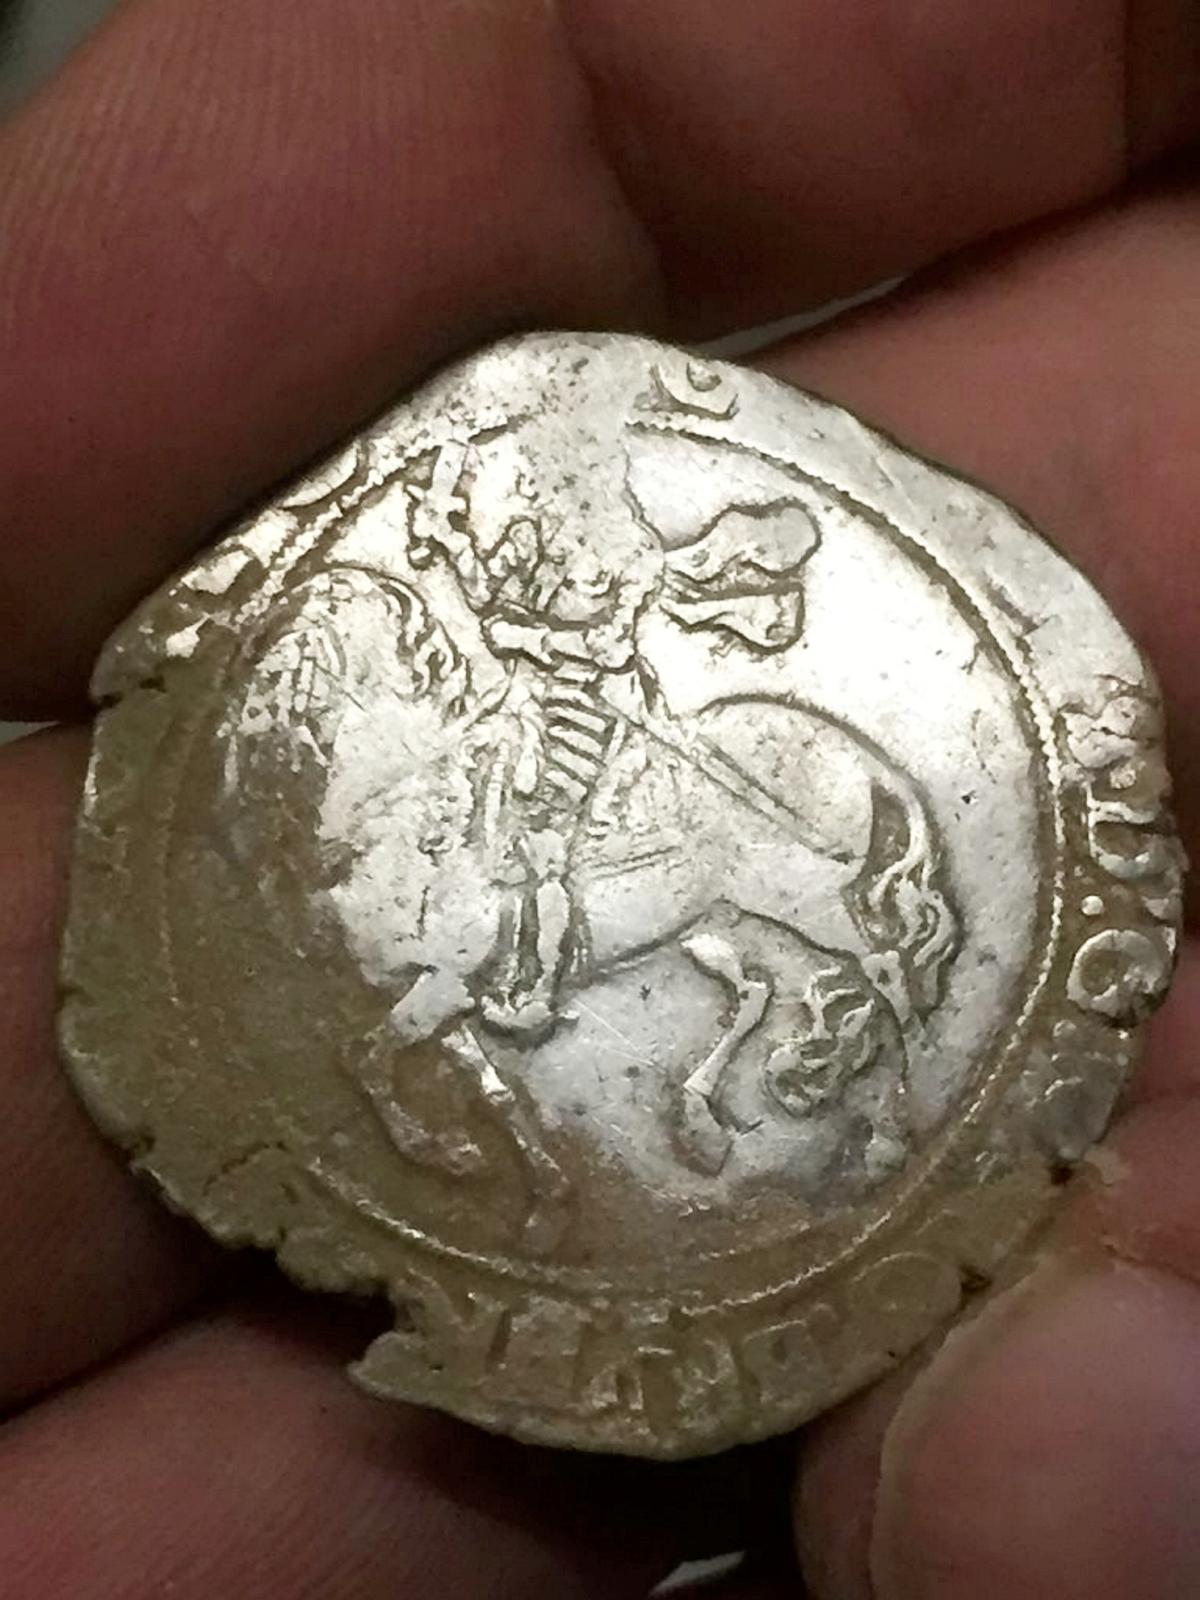 A Charles I coin was also discovered. (©SWNS)